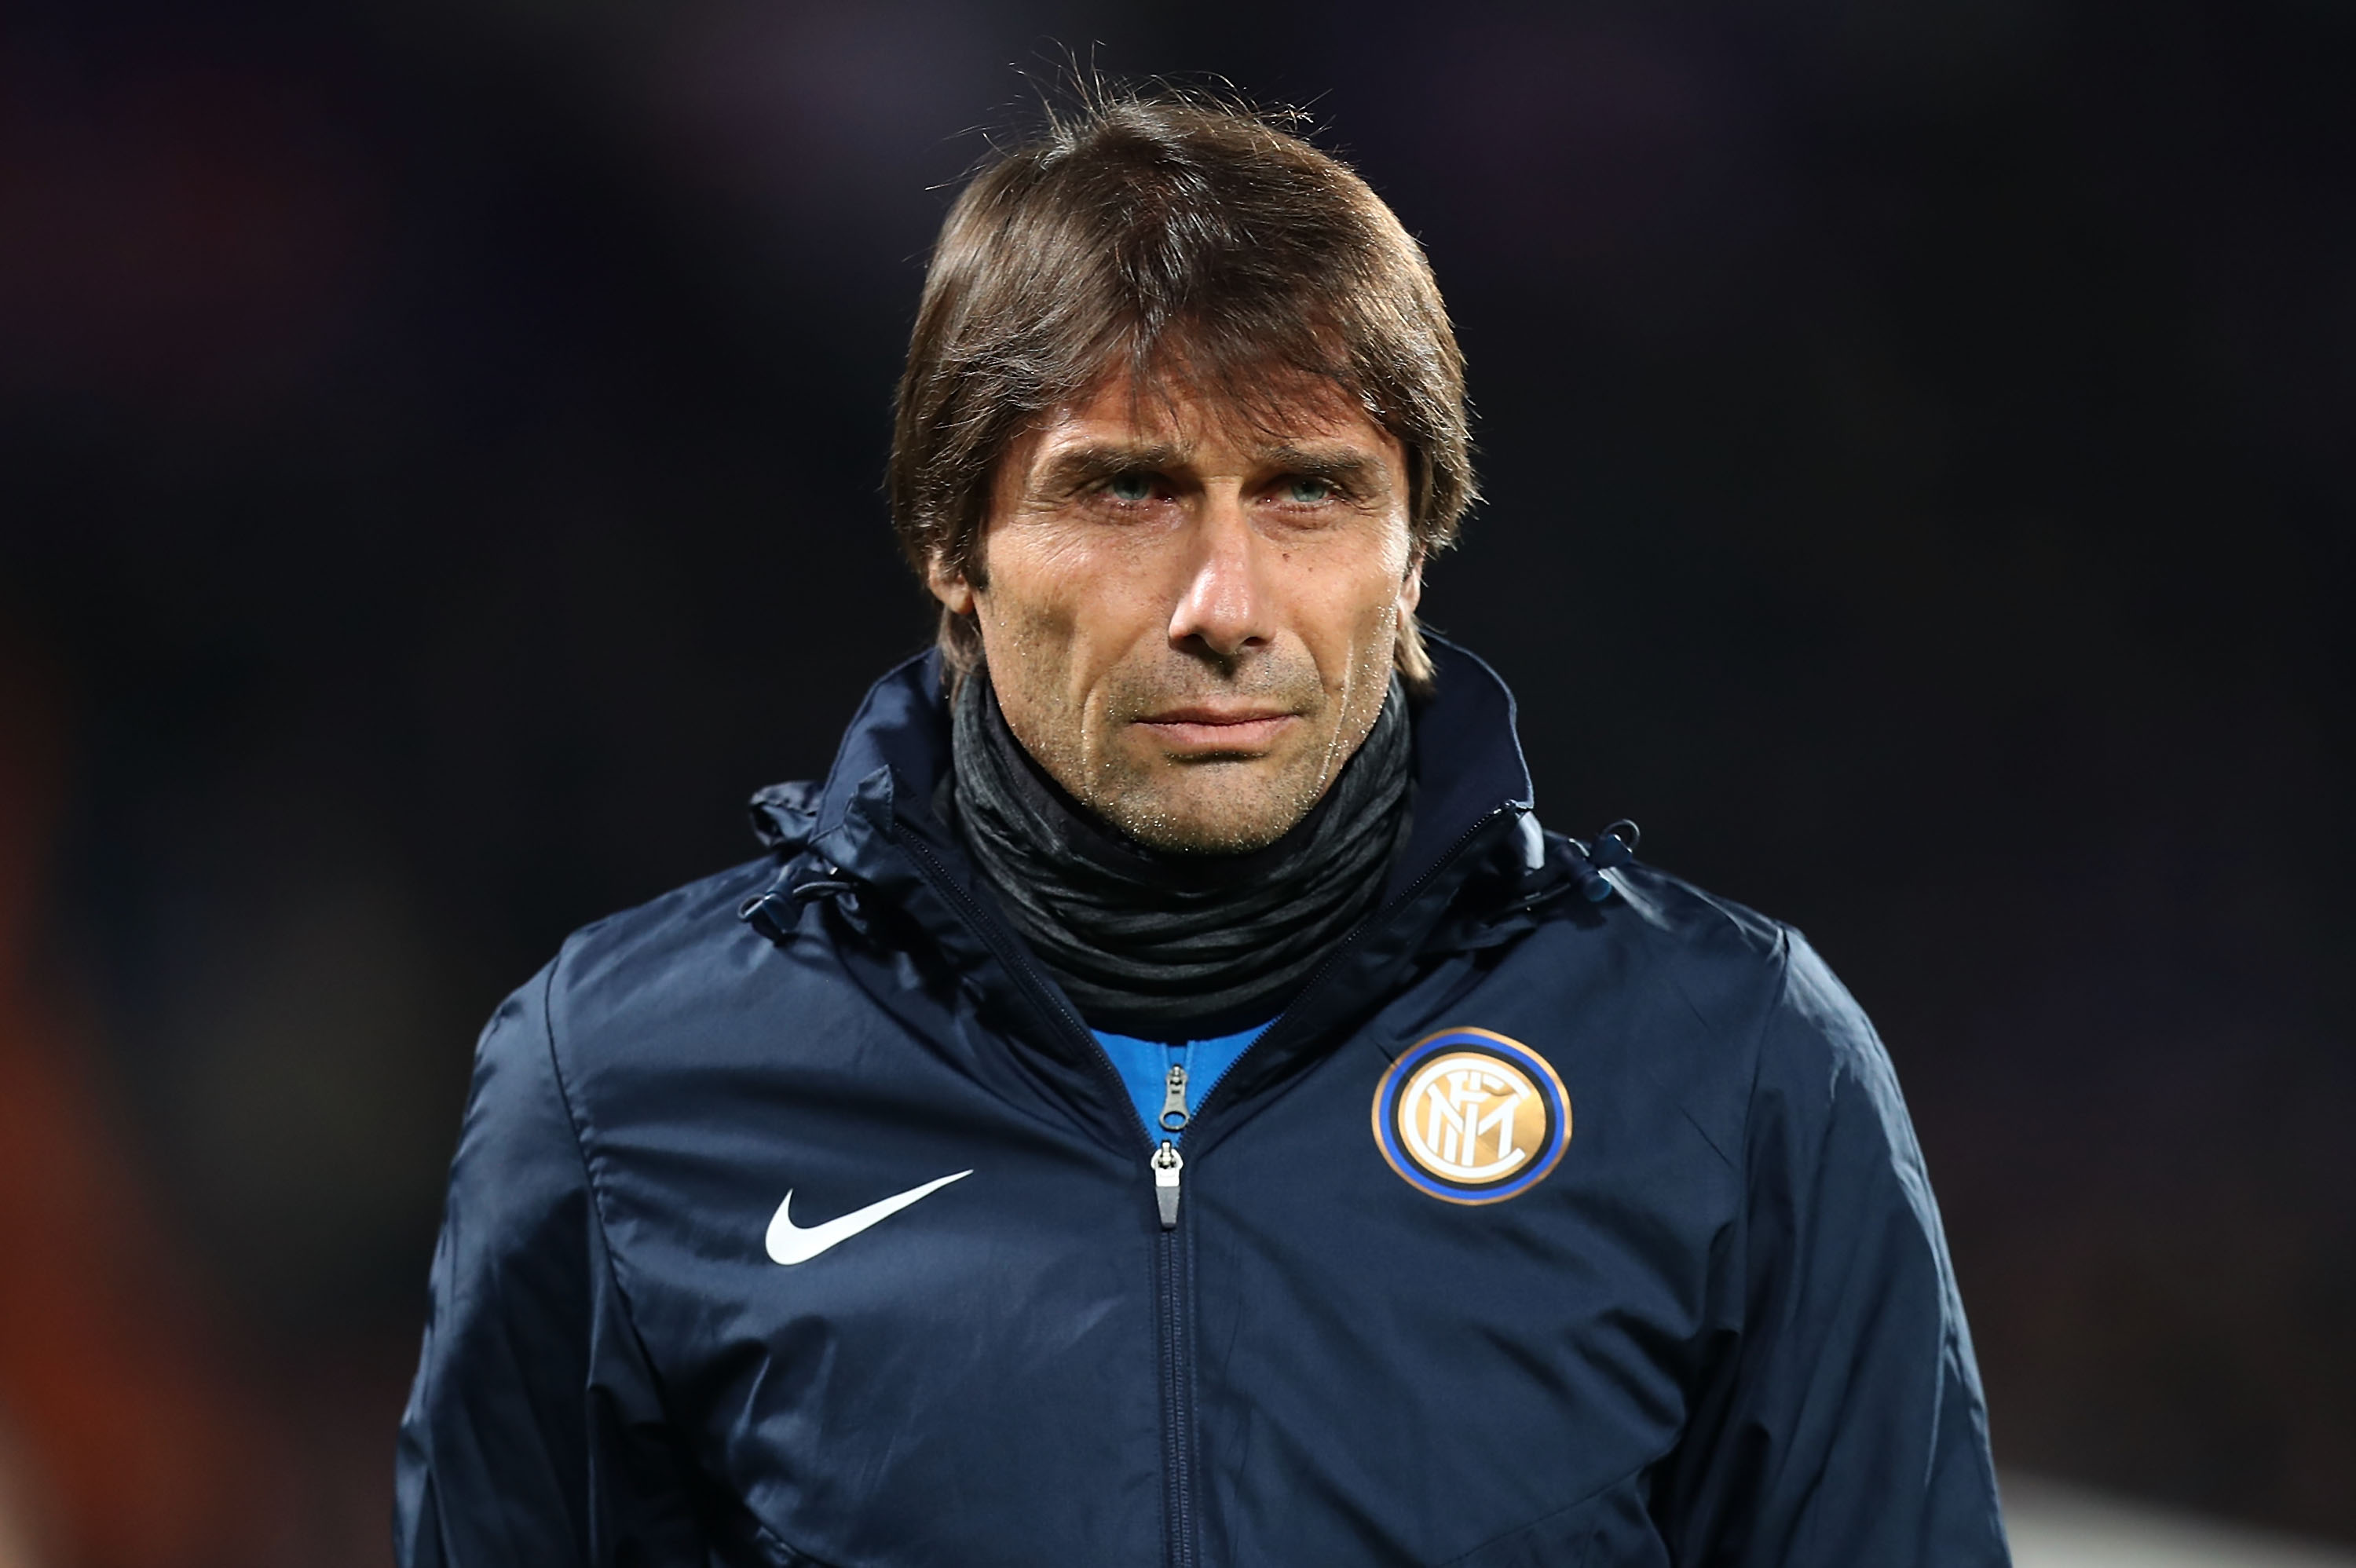 Antonio Conte does not have many injury problems to deal with (Photo by Gabriele Maltinti/Getty Images)